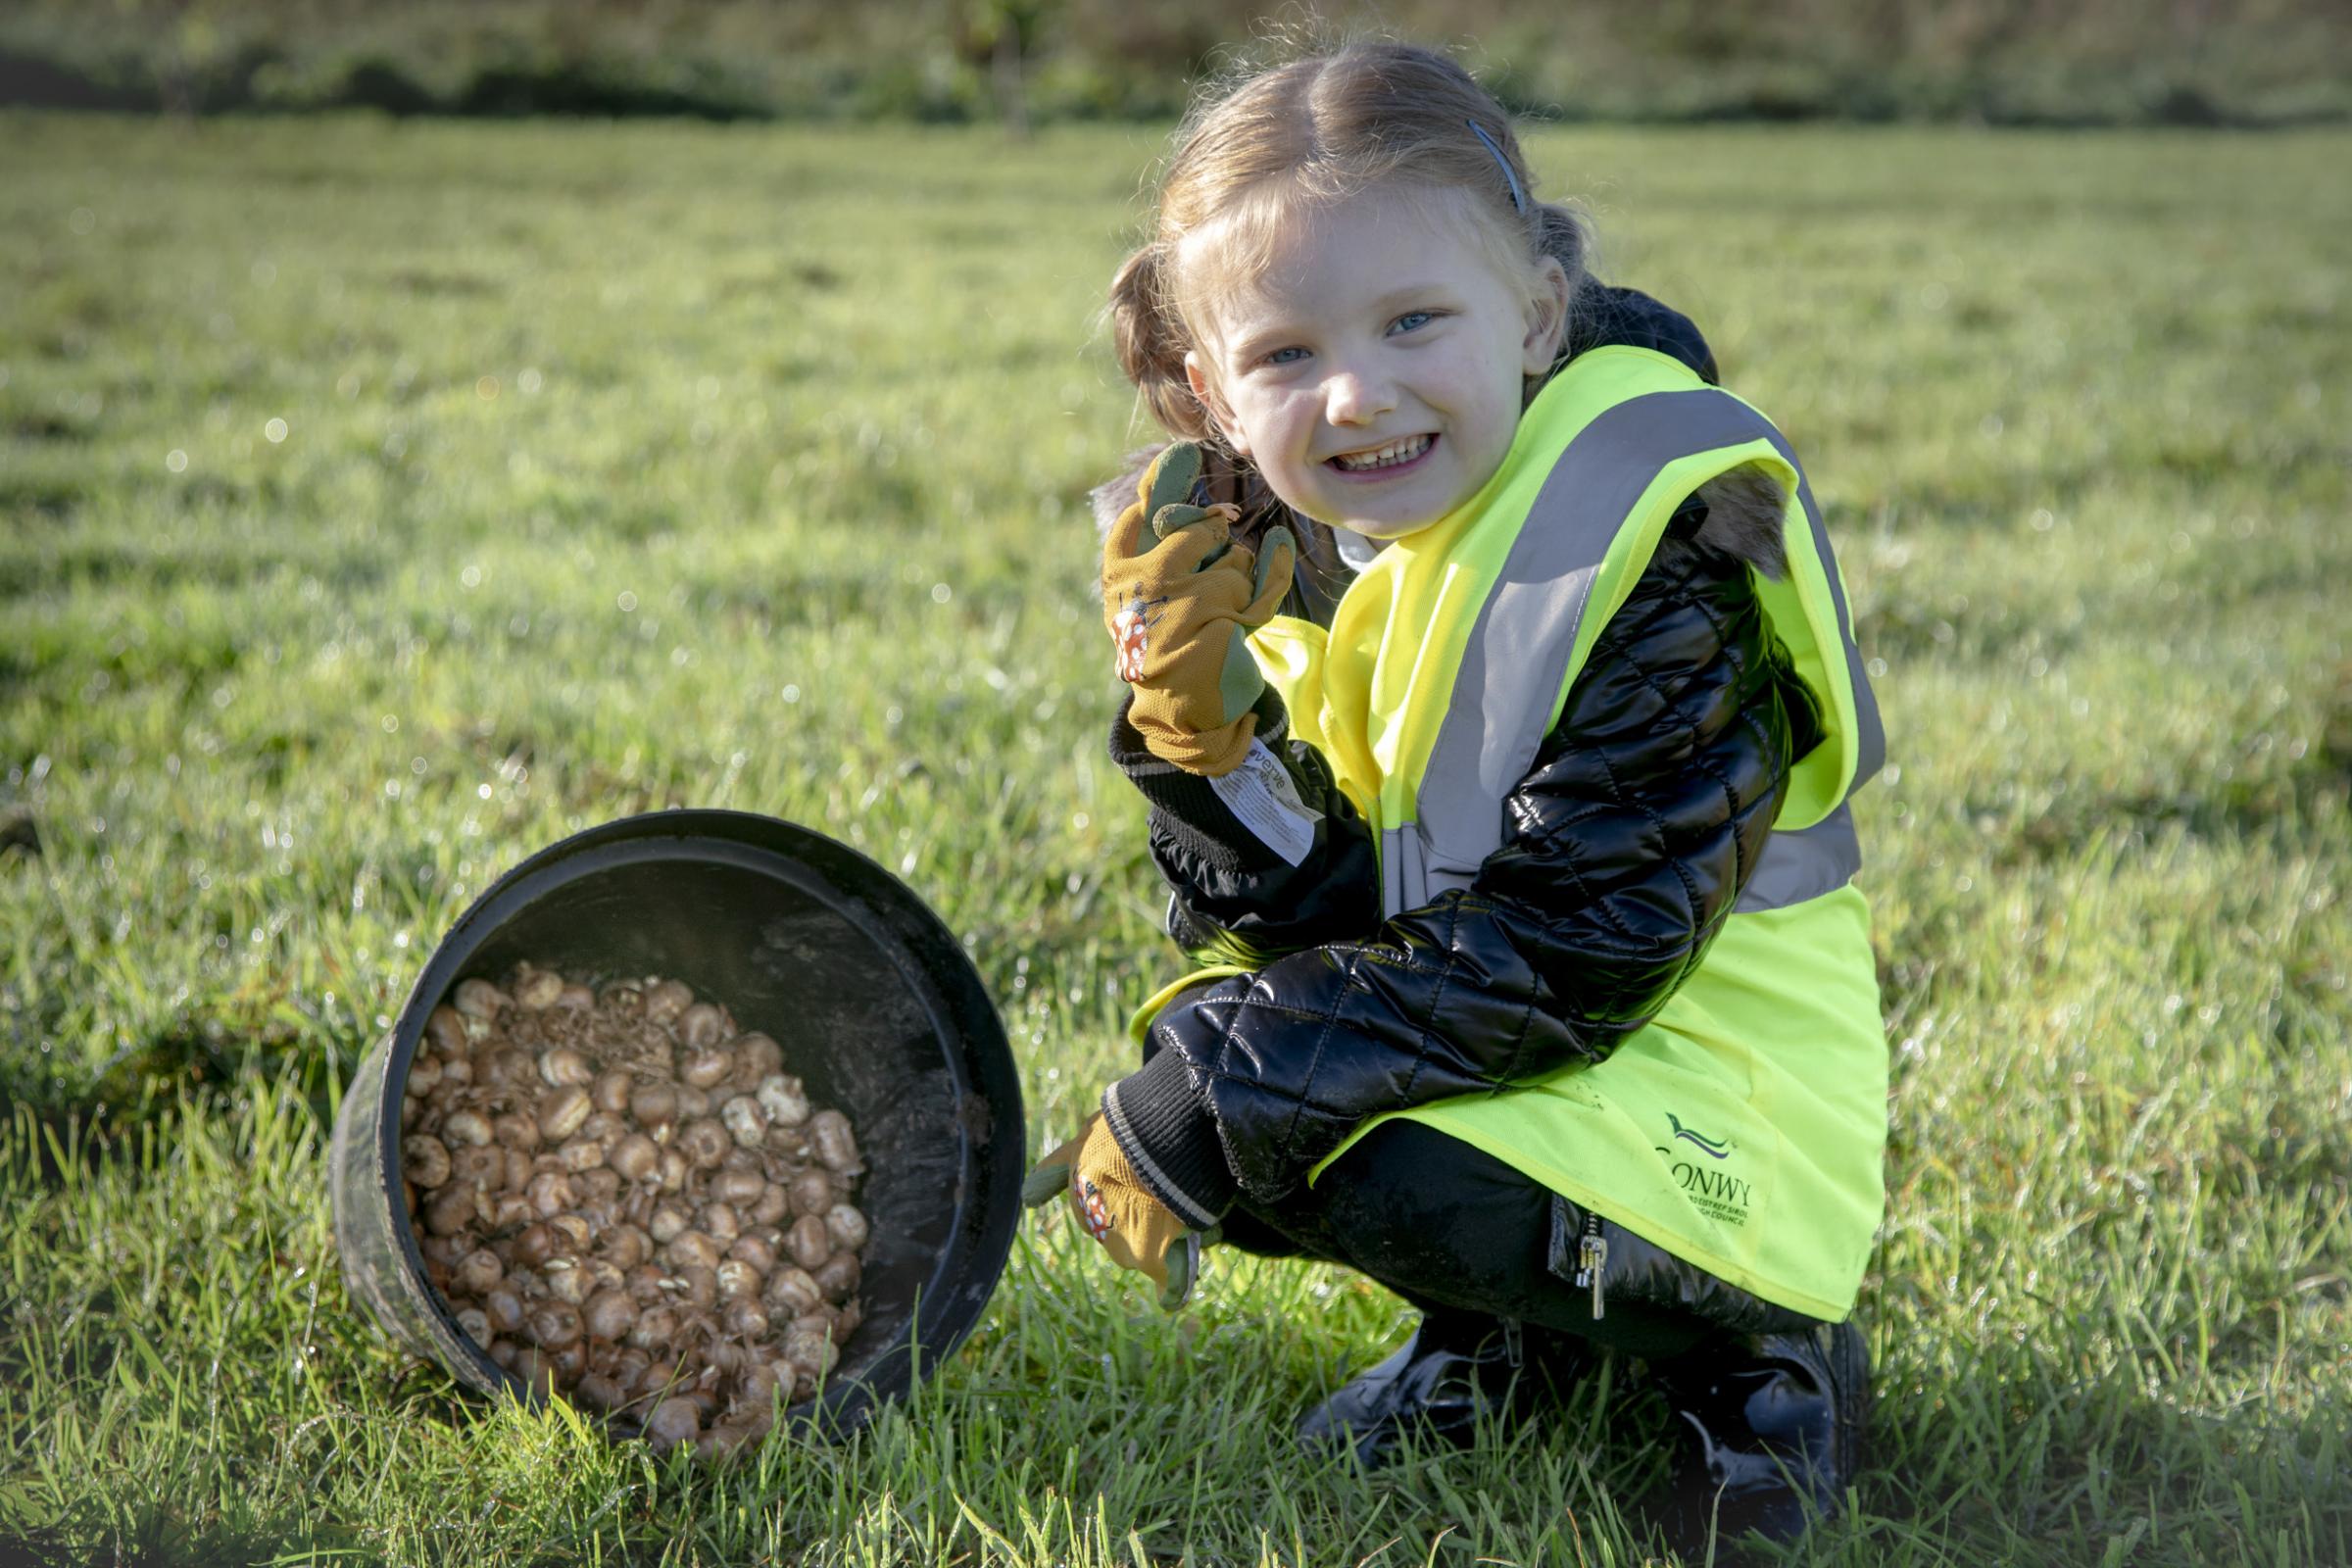 Cartrefi Conwy tree planting on the Peulwys estate; Sorting out the bulbs is Ysgol Swn y Don pupil Luna. Picture Mandy Jones